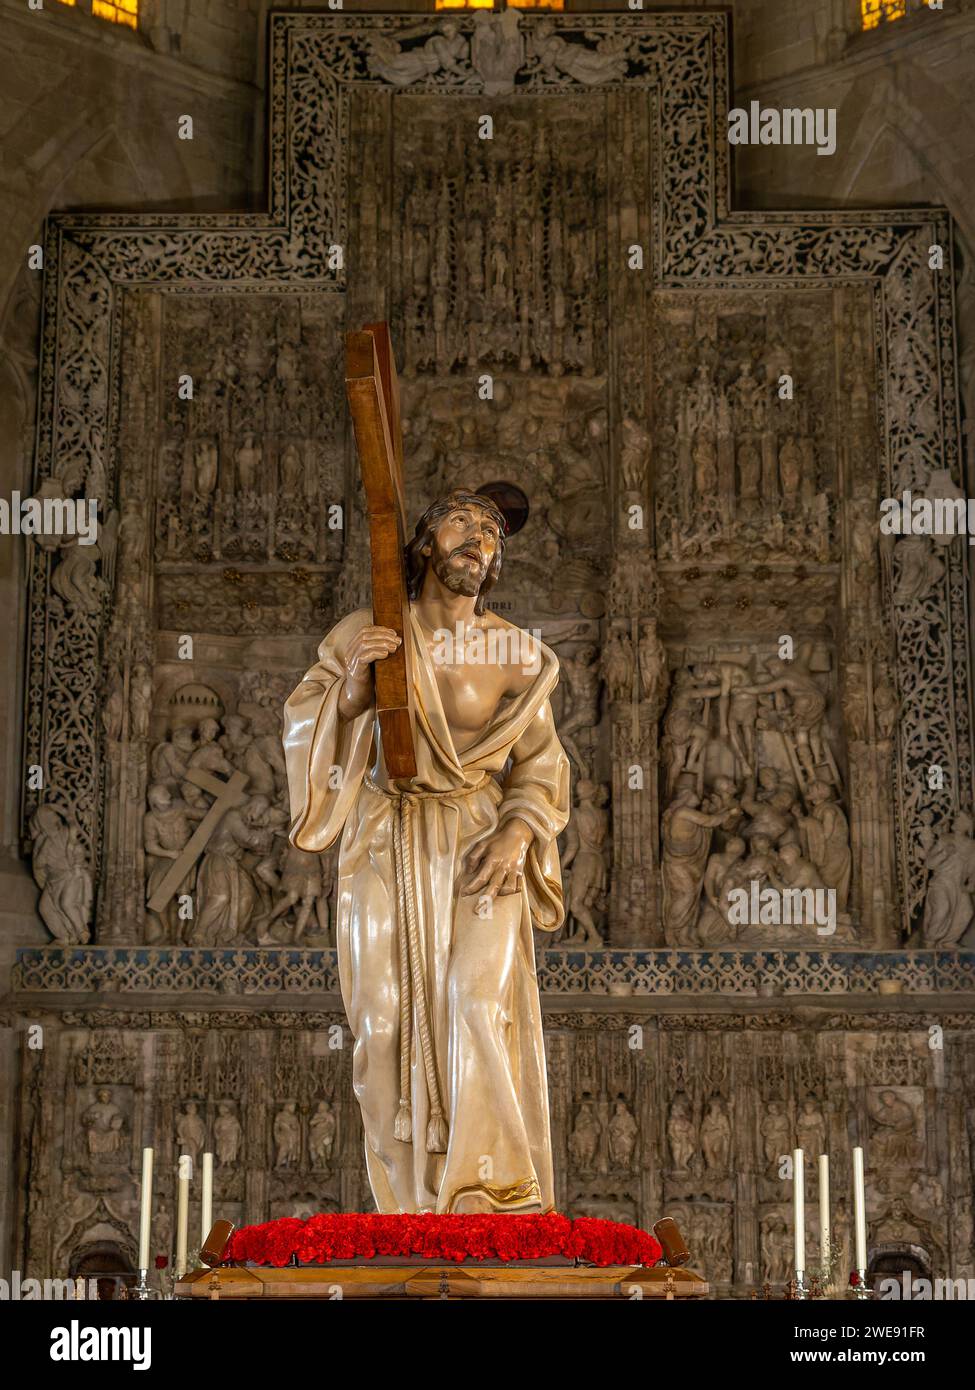 Image of Our Father Jesus of Nazareth of Huesca. Easter. Brotherhood of Huesca Stock Photo